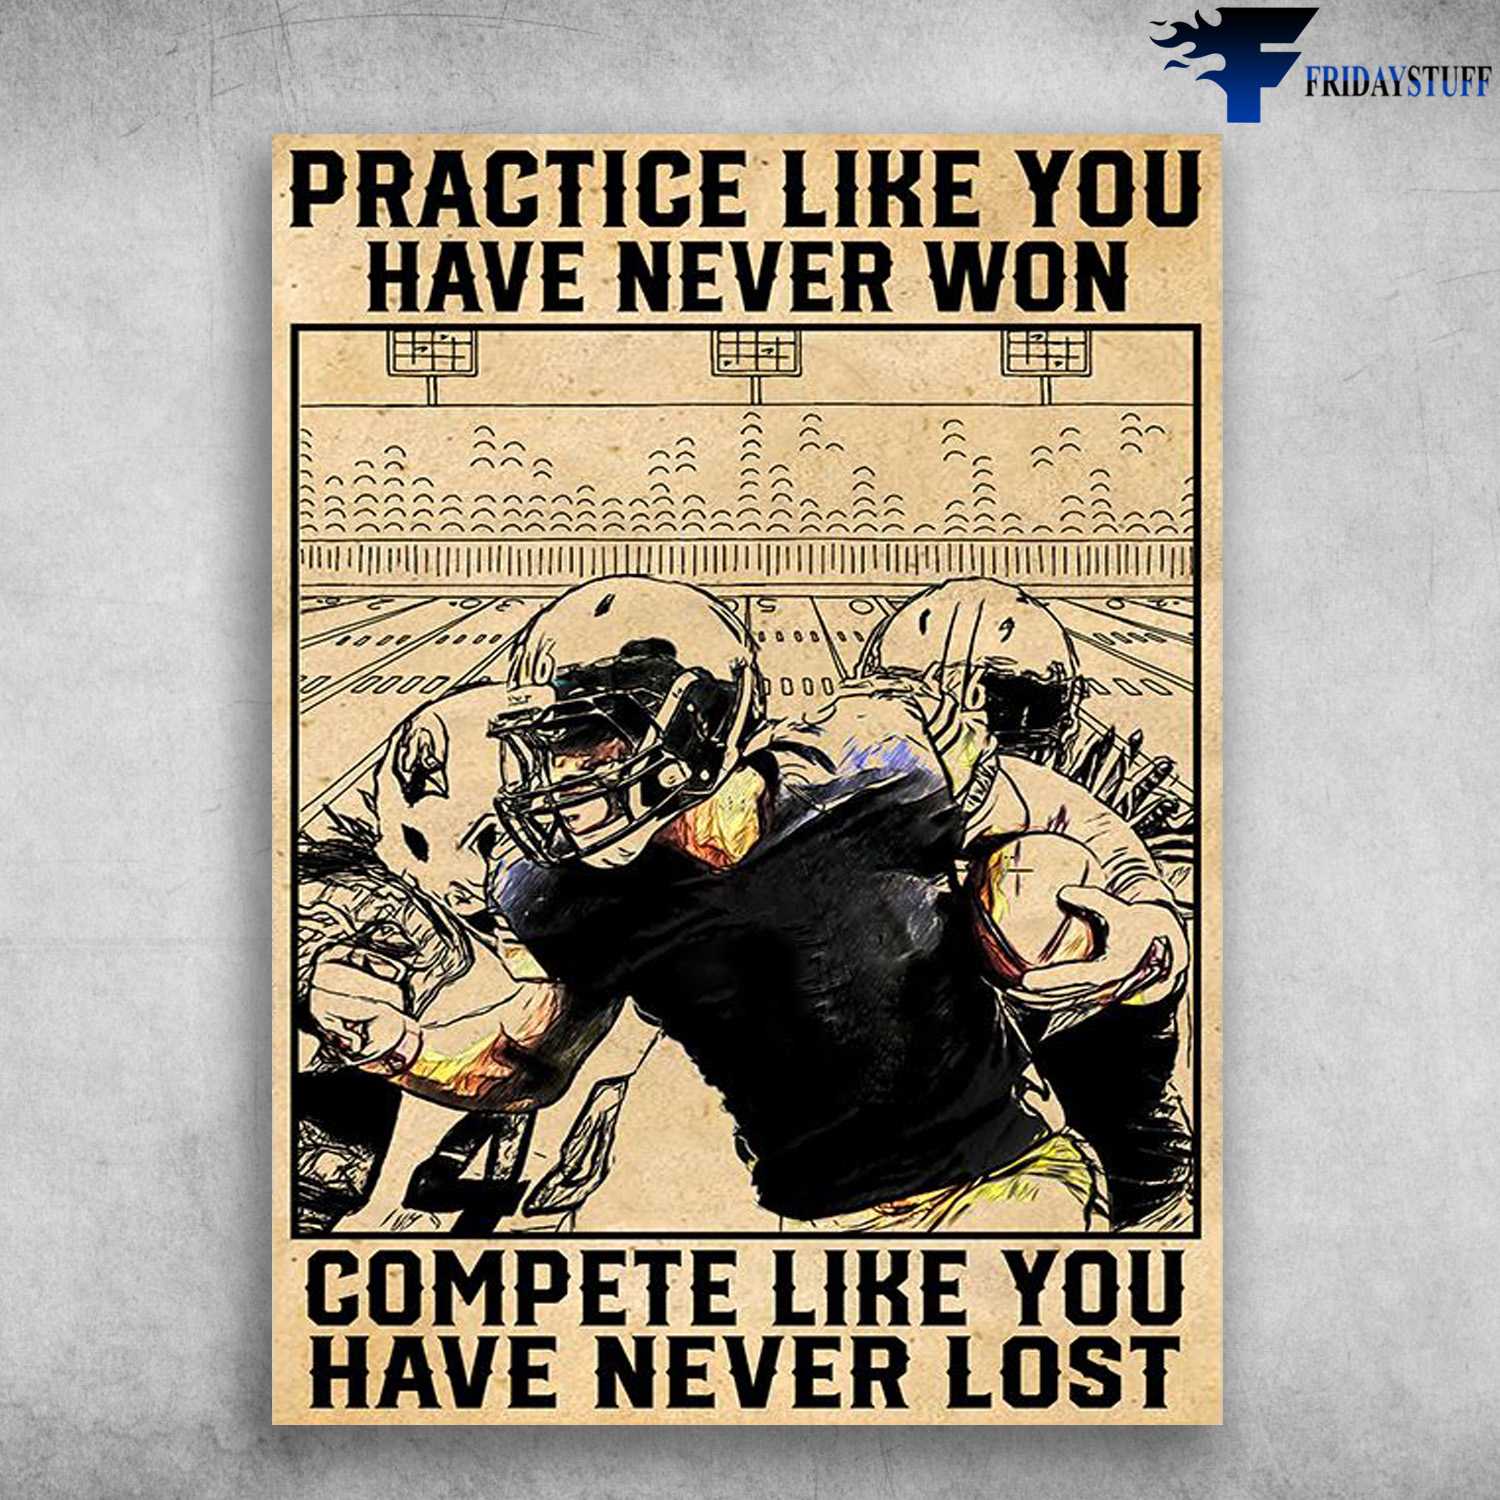 Football Player, Football Poster, Practice Like You Never Won, Complete Like You Have Never Lost